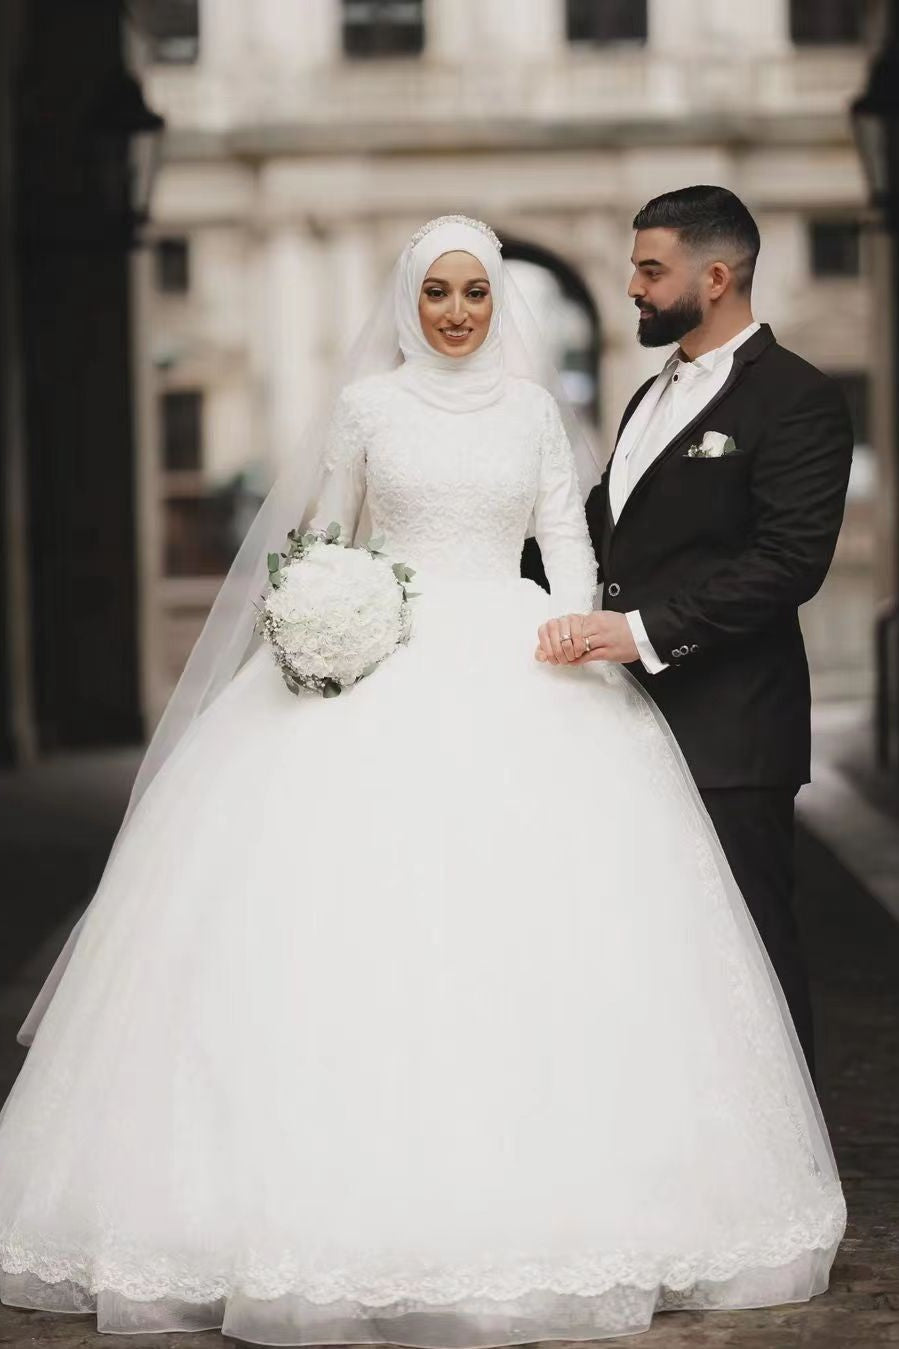 Can I wear an off-white dress on my wedding? I'm a Muslim girl. - Quora